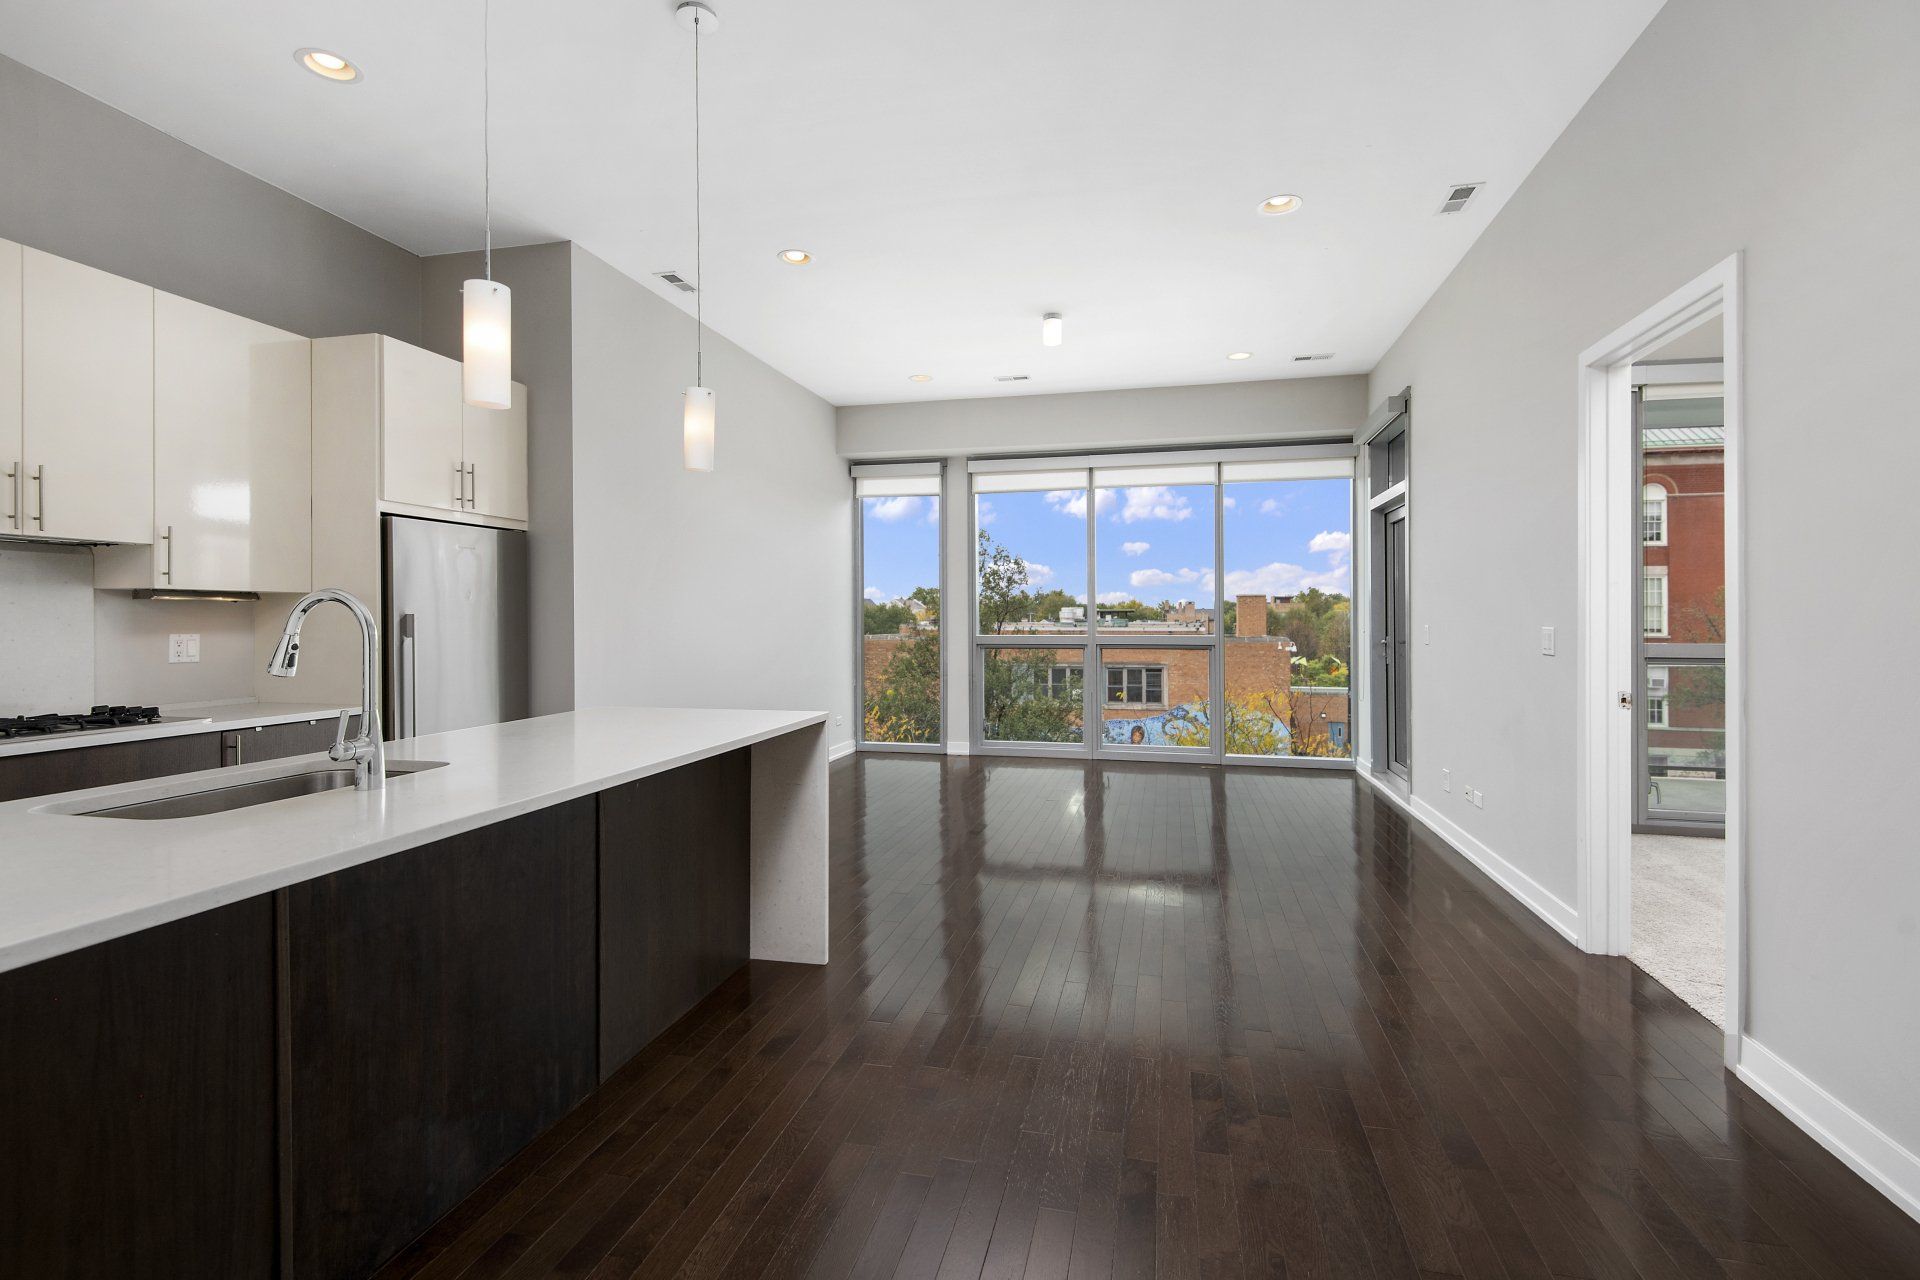 Open floor plan apartment with a kitchen and a large window at 1846 W Division Street.